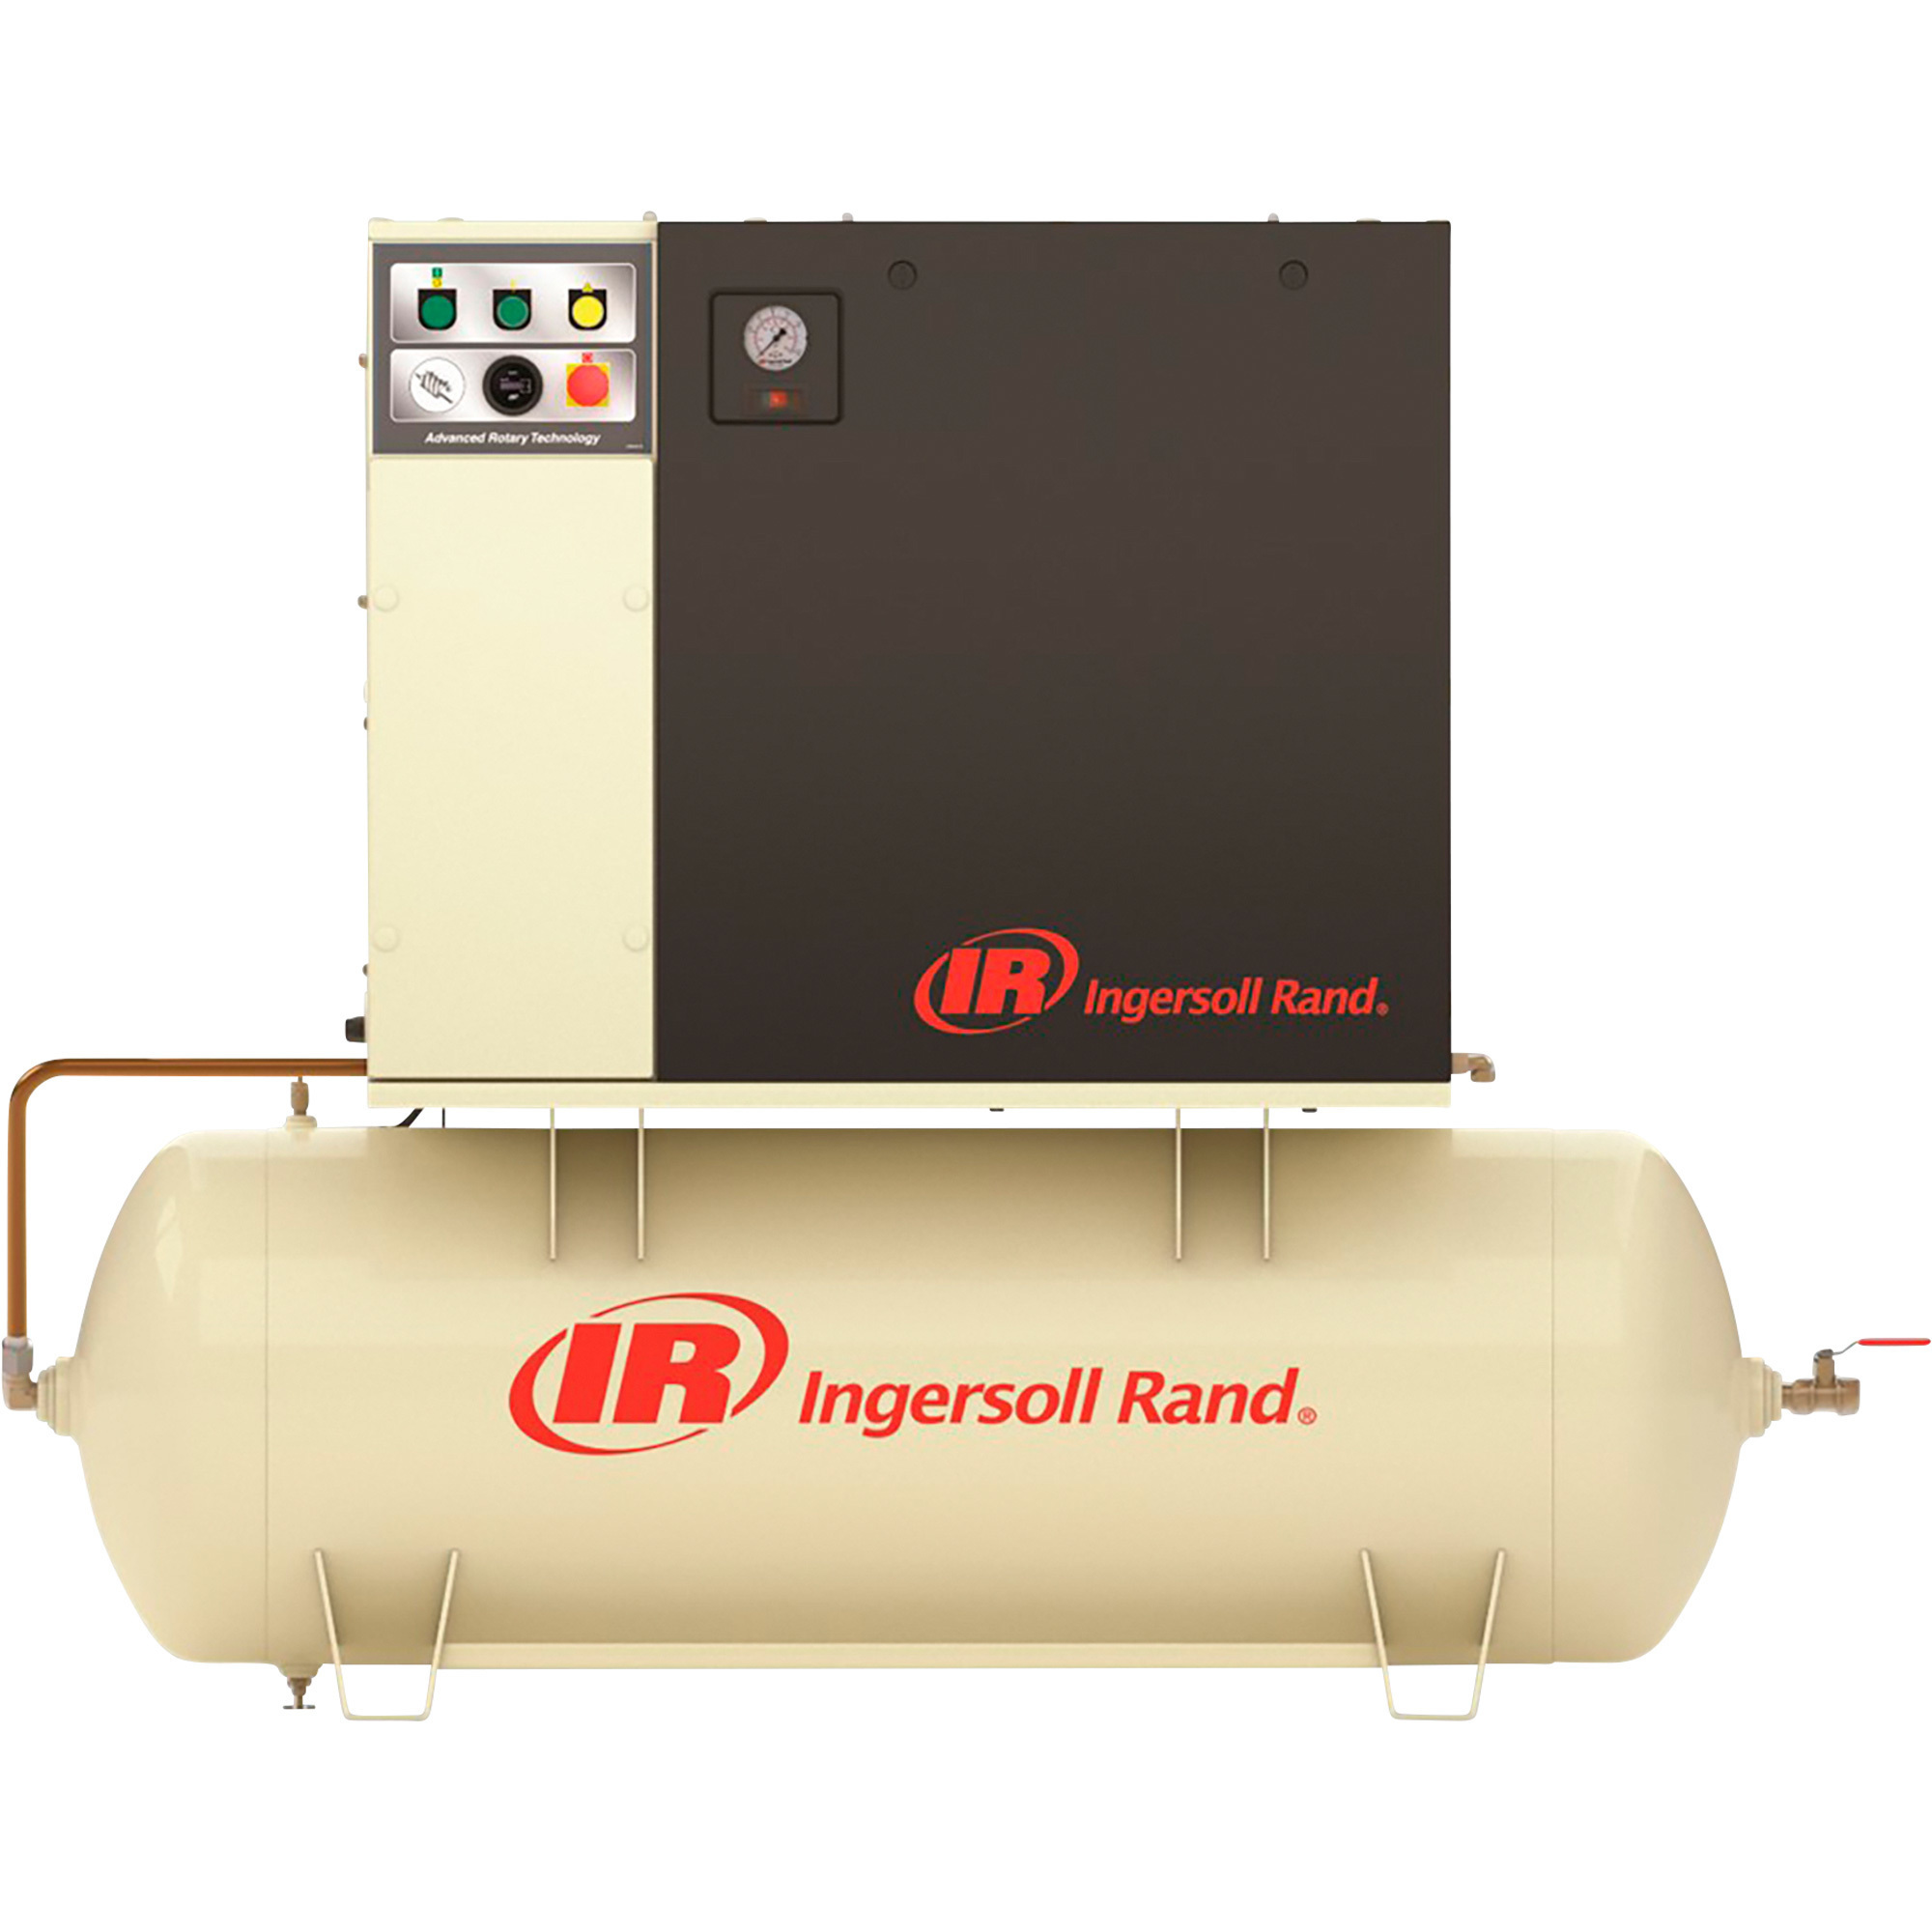 Ingersoll Rand Rotary Screw Air Compressor, 230 Volts, 3 Phase, 15 HP, 55 CFM, 120 Gallons, Model UP6-15c-150